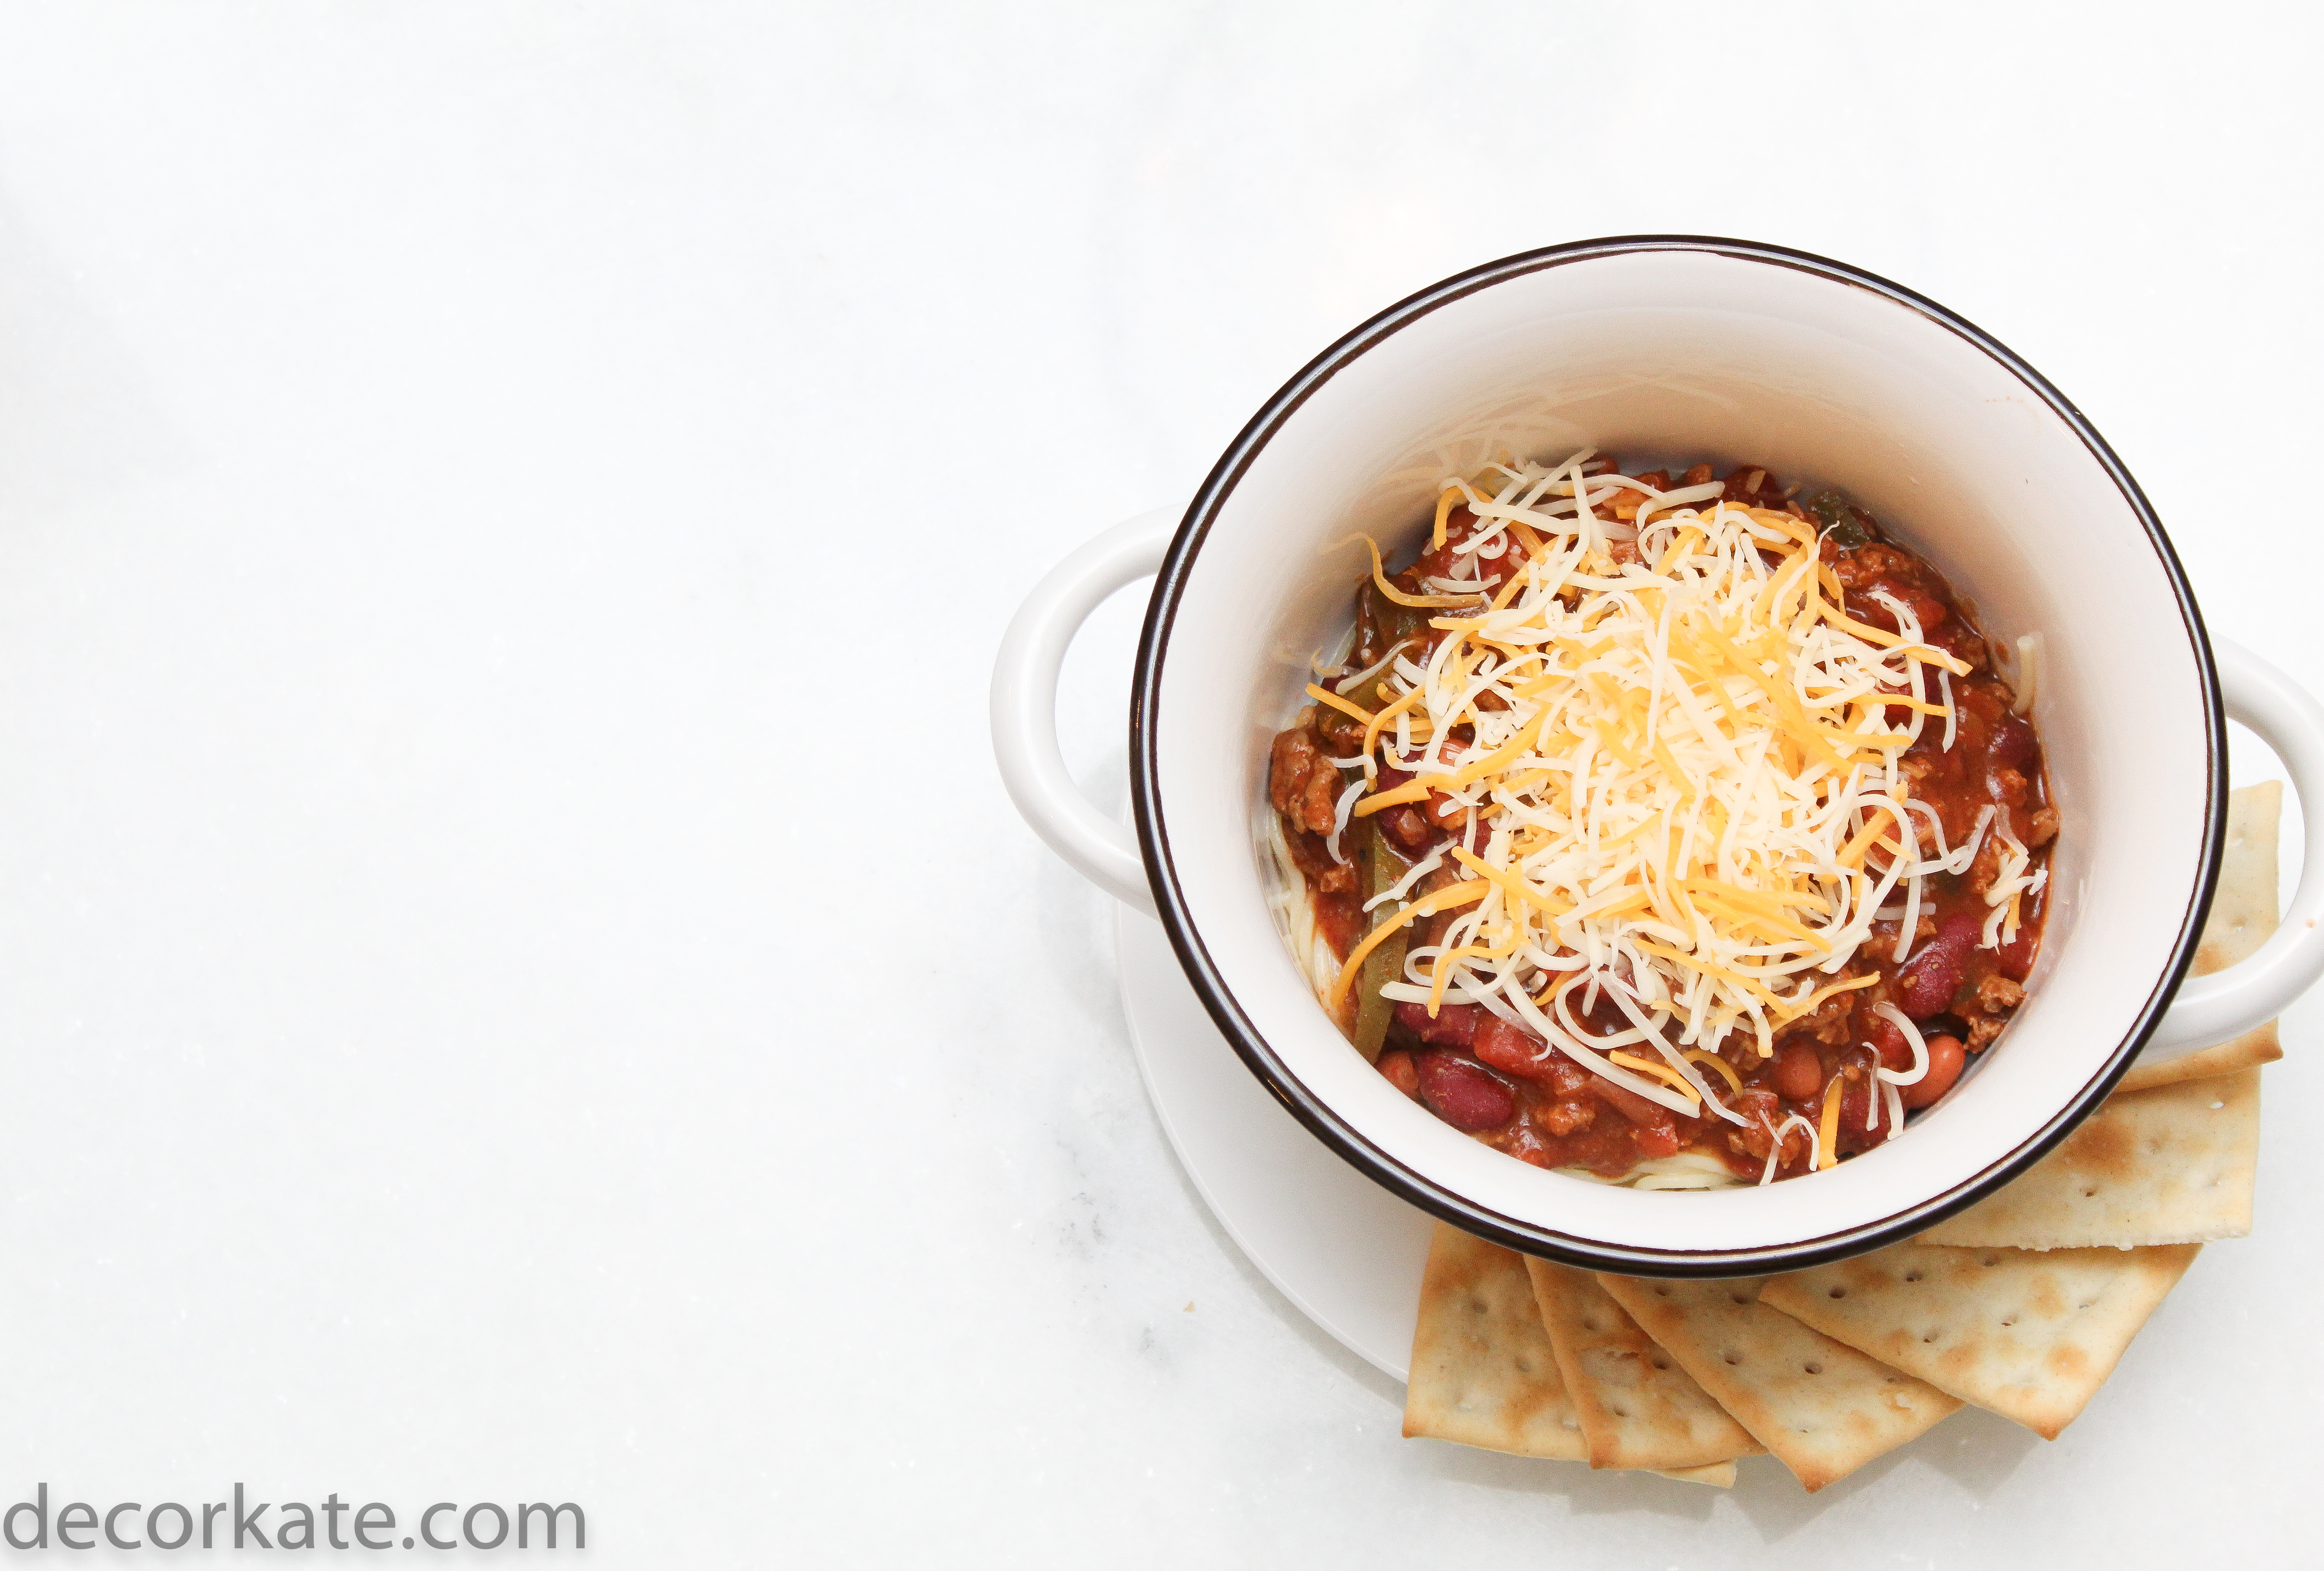 Chili With Shredded Cheese